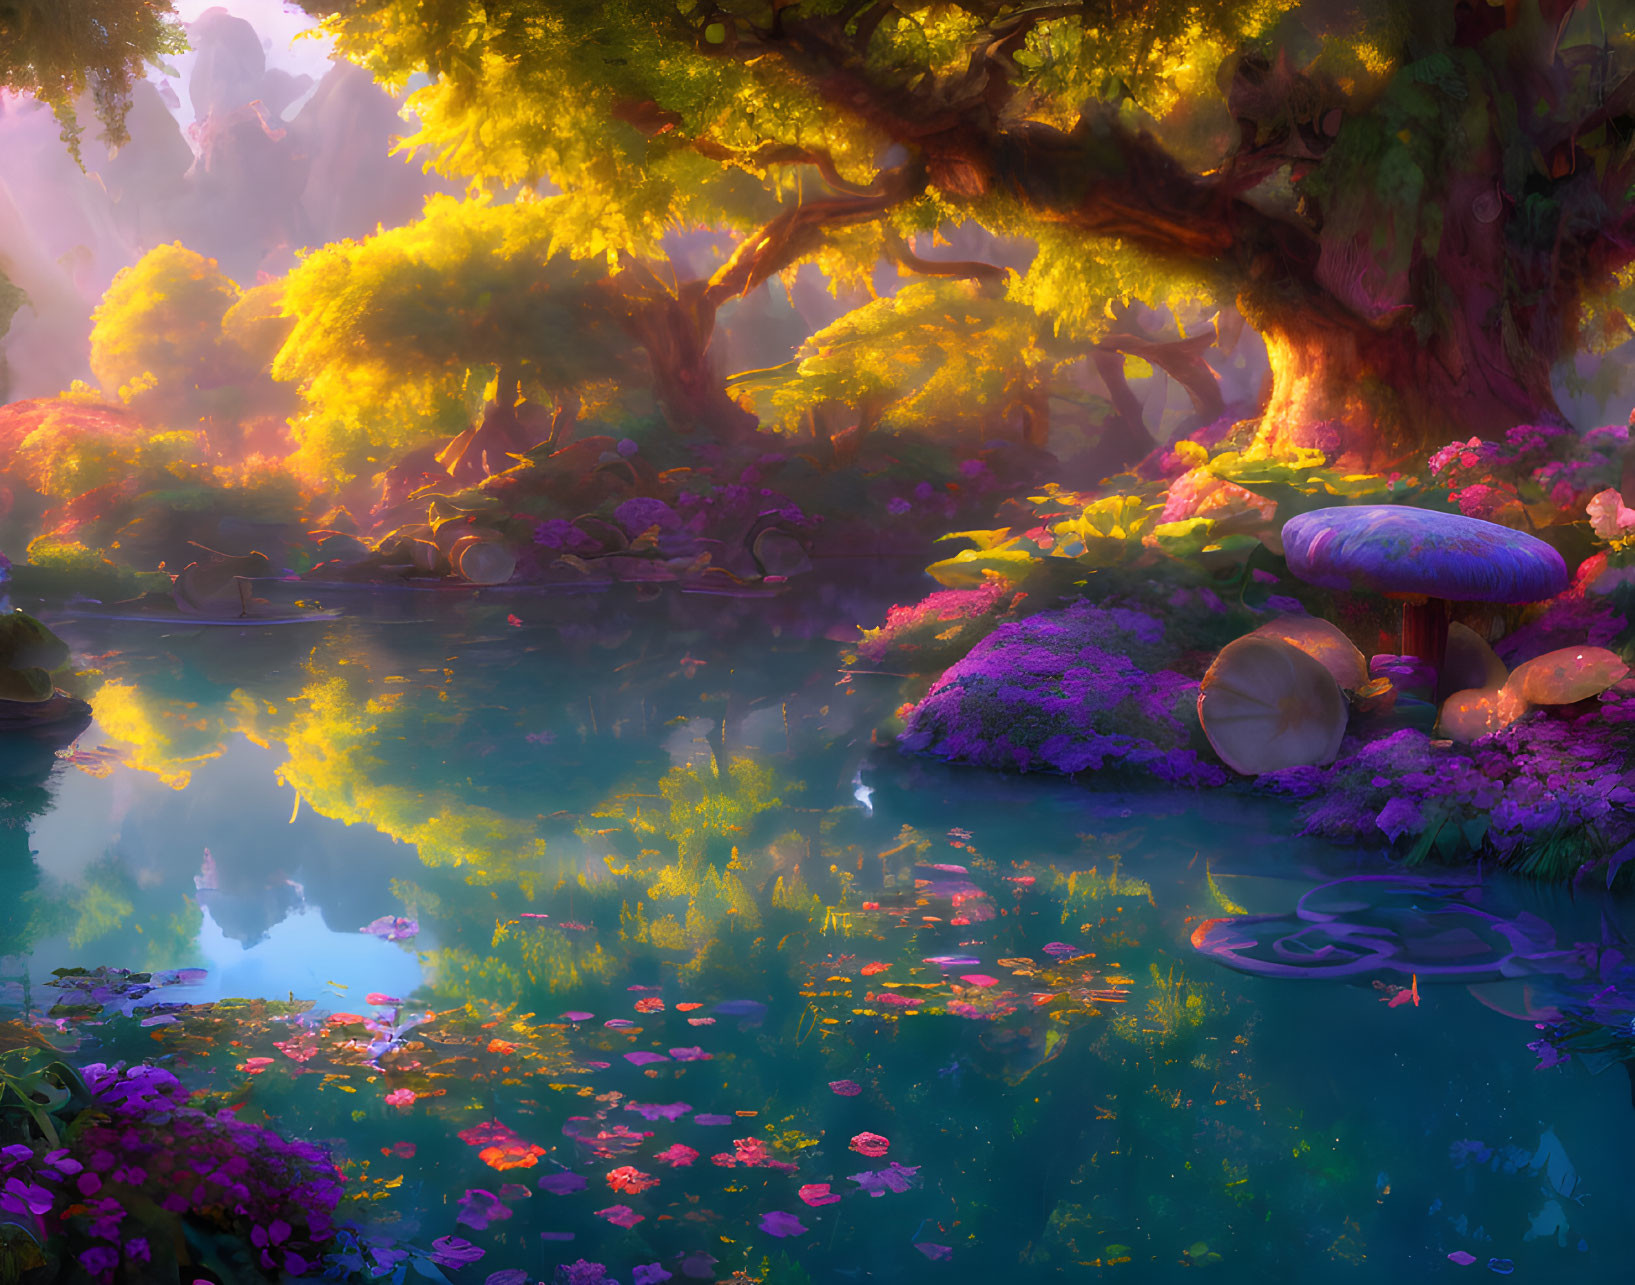 Colorful Fantasy Landscape with Serene Lake and Magical Tree Canopy